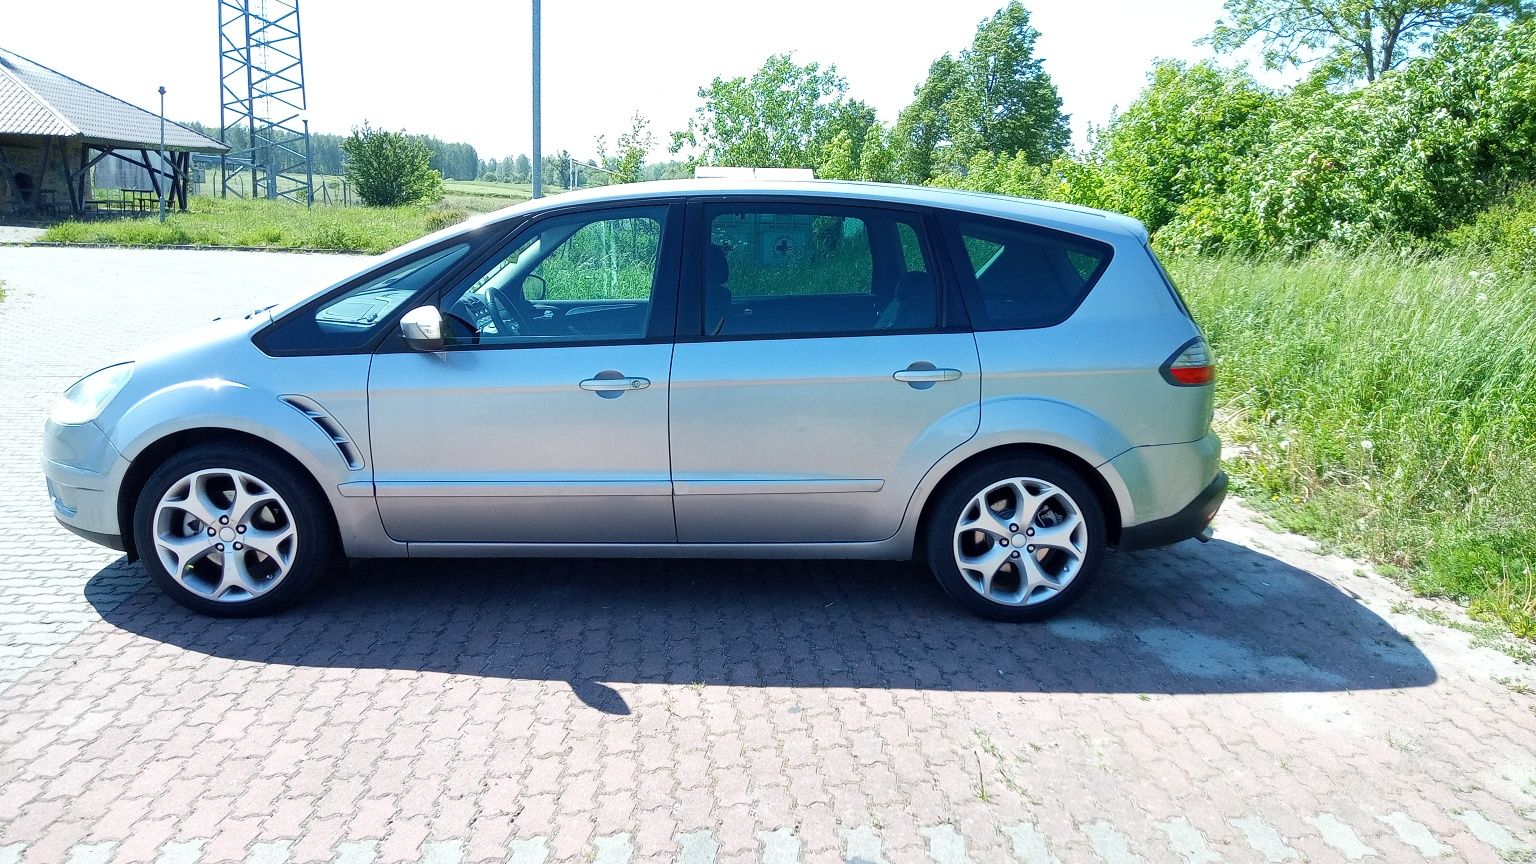 Ford Smax 2.0 benzyna 145km